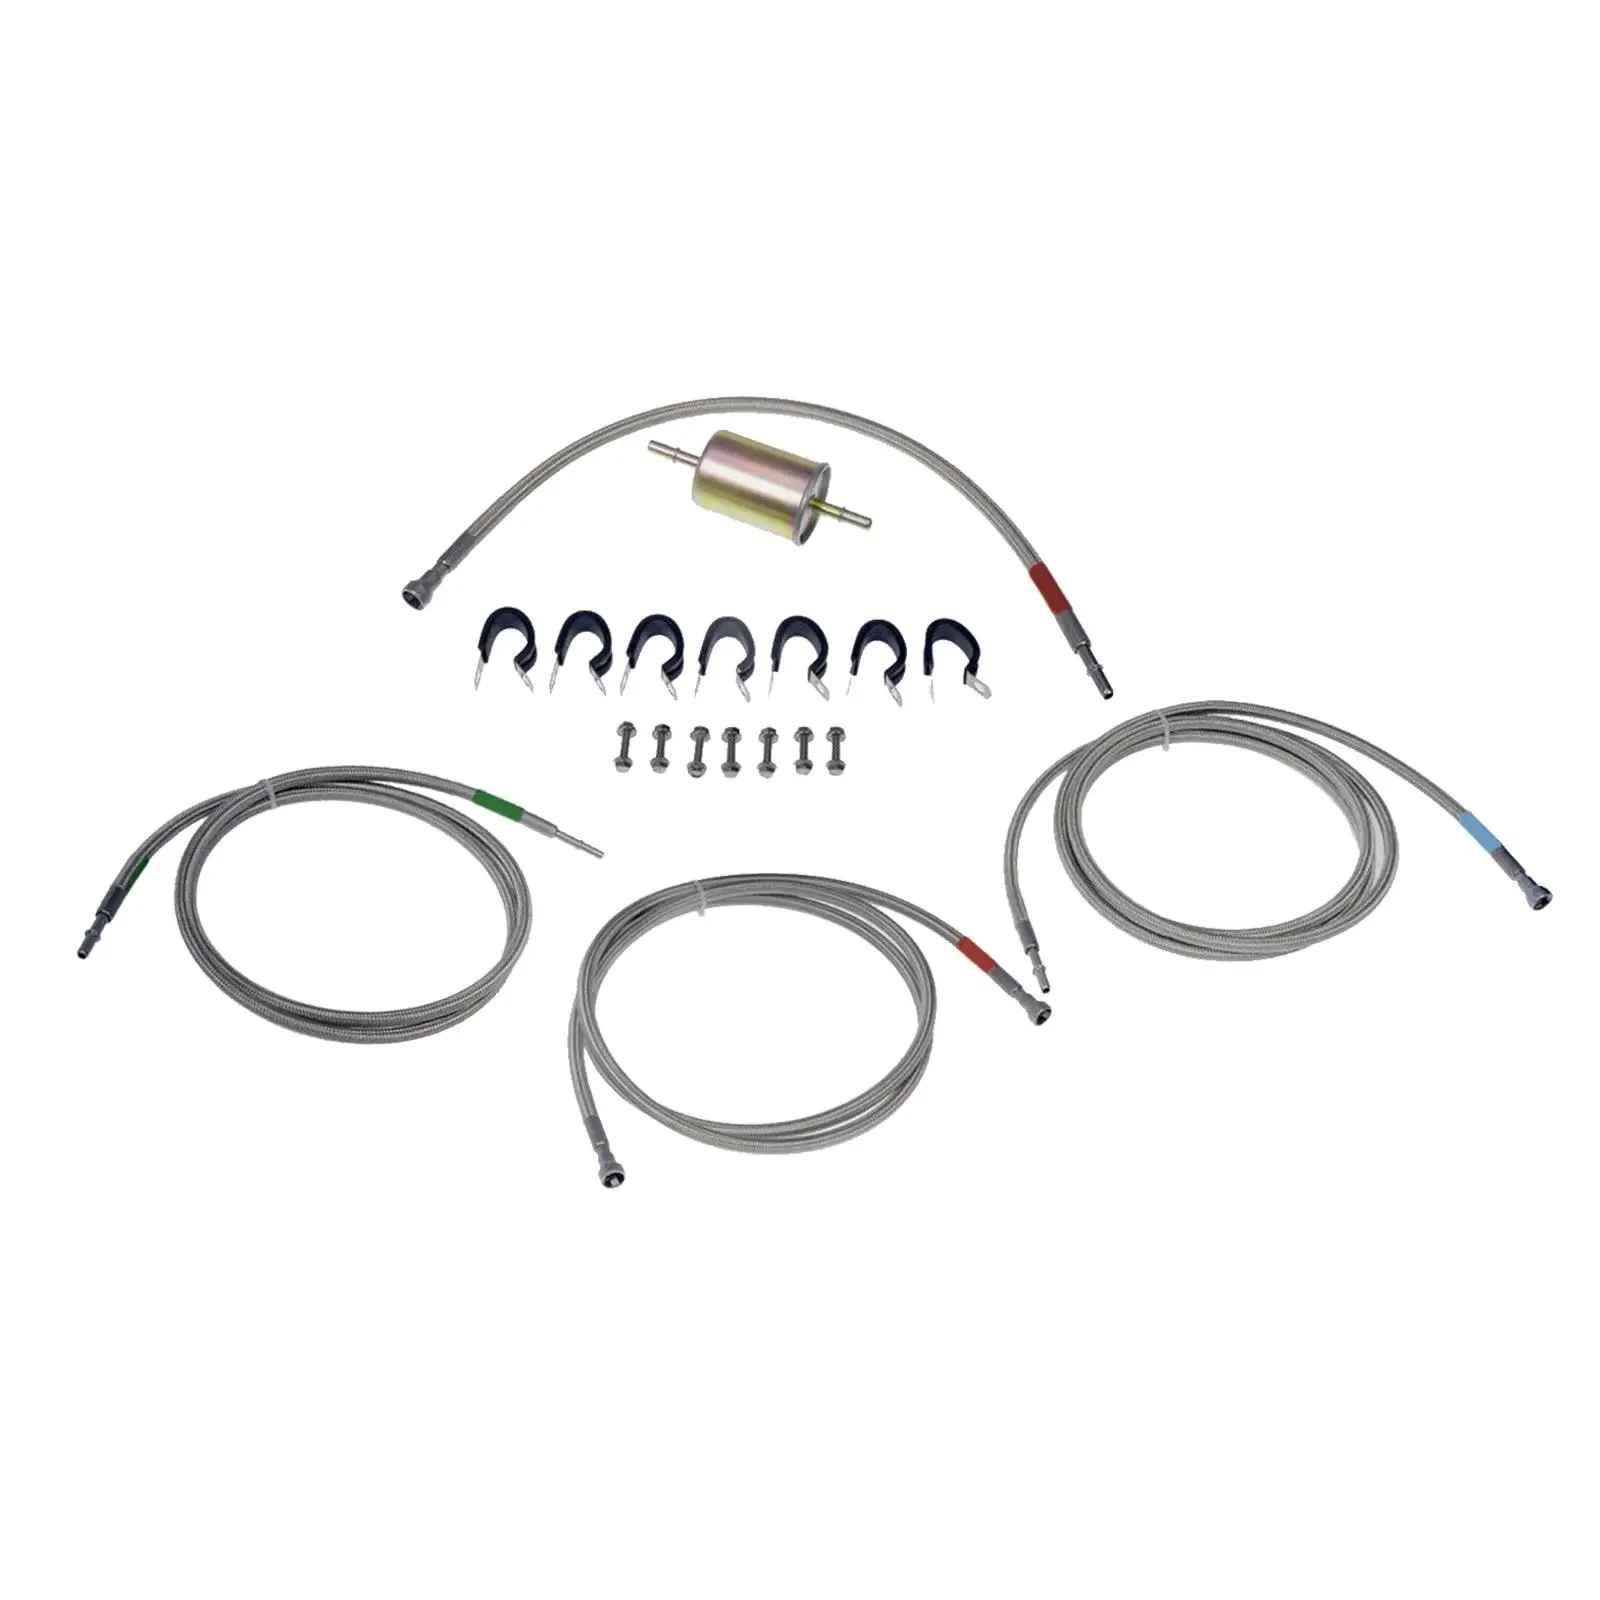 Fuel Line Assy 819-840 Steel Braided Fuel Lines Set Repair Parts Assembly Direct Replaces for Chevrolet Silverado 1500 2500